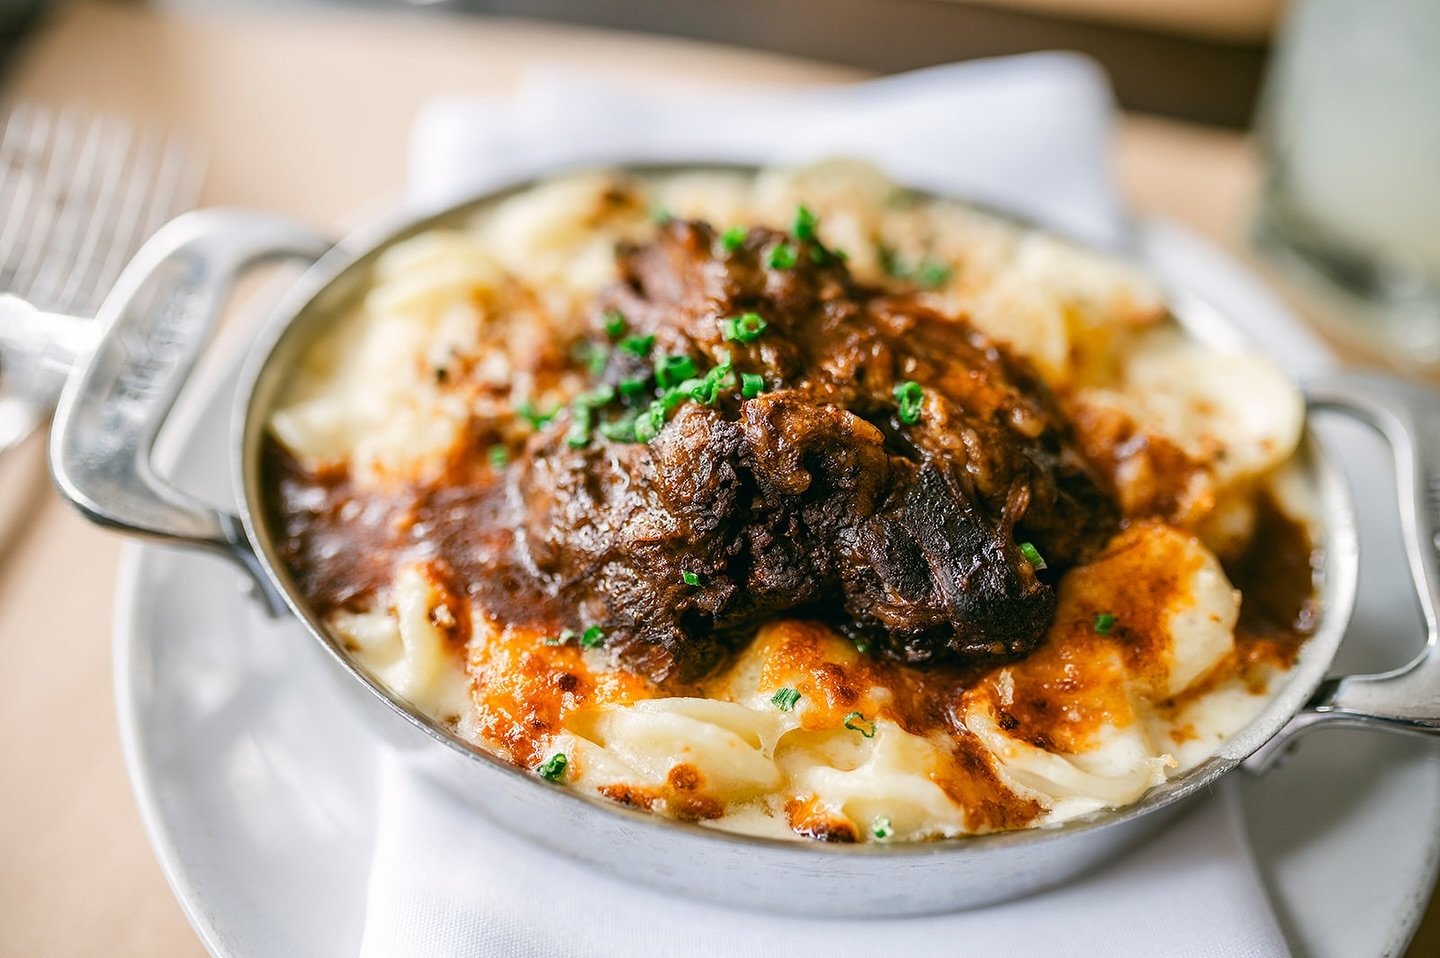 Mac + Cheese

Add Braised Short Rib 

Open today at 5:00! 

Happy Hour Specials until 6:00 at the Bar! 🍻

#oldfieldsofgreenlawn